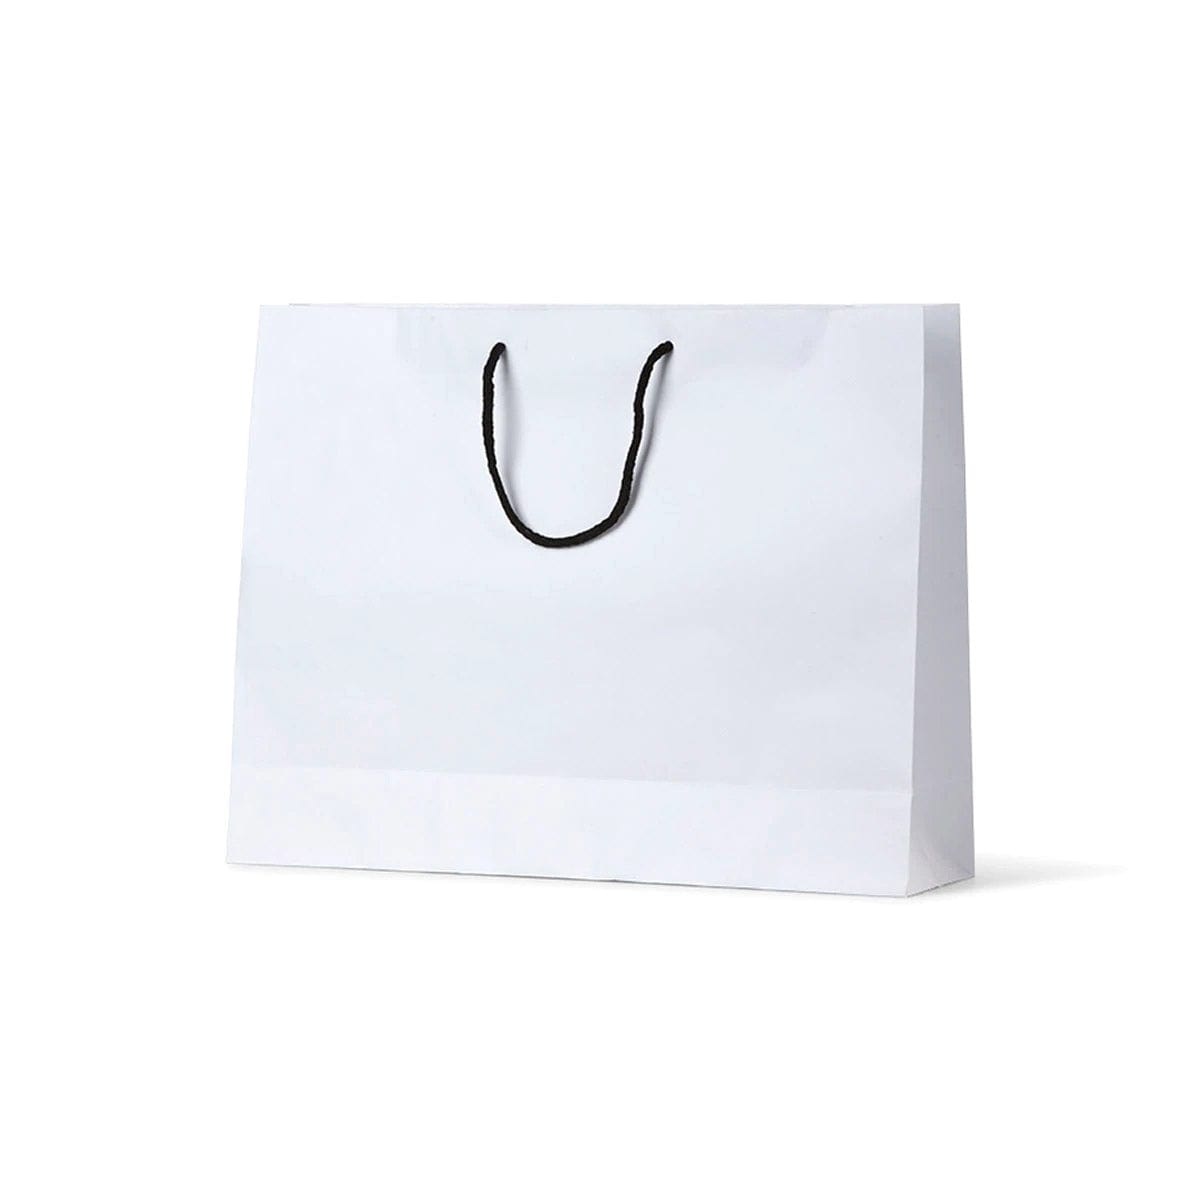 Black and white paper bags realistic bag isolated Vector Image